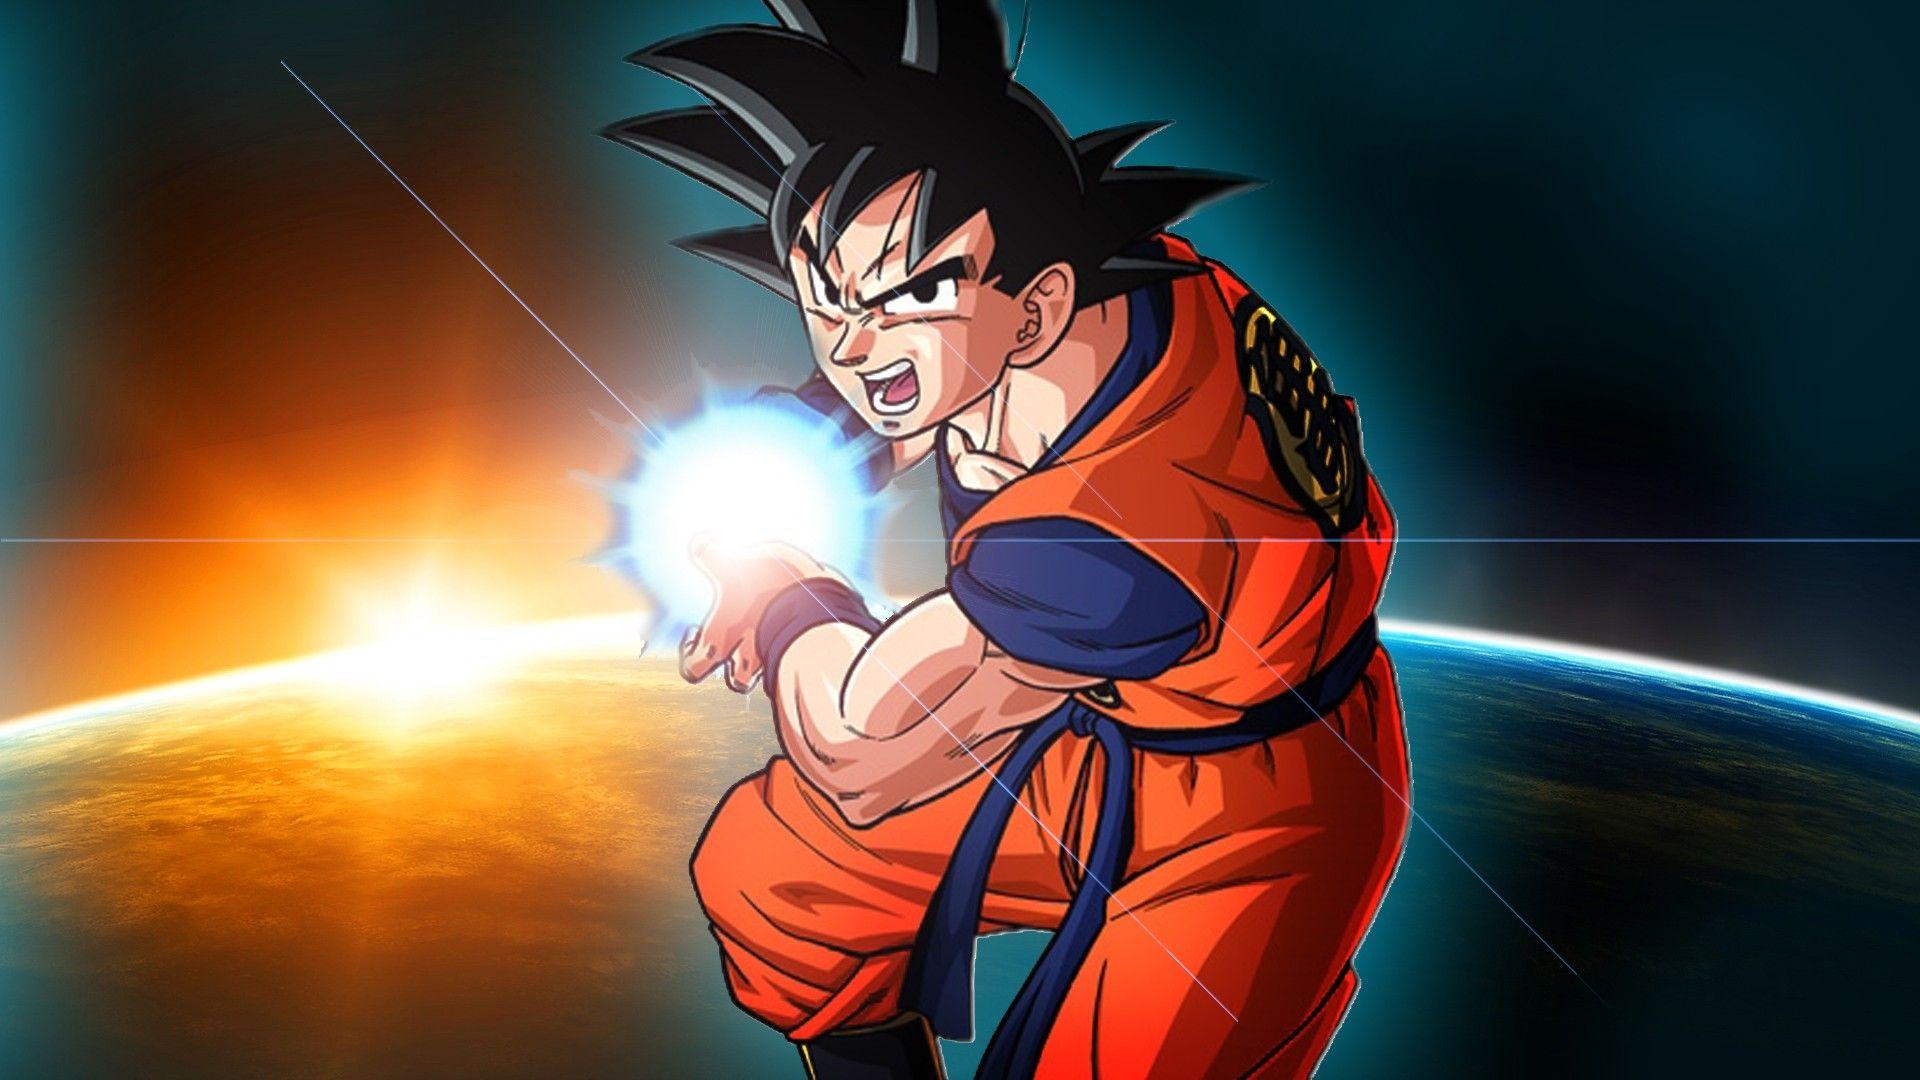 Dragon Ball Pc Wallpapers Top Free Dragon Ball Pc Backgrounds Wallpaperaccess